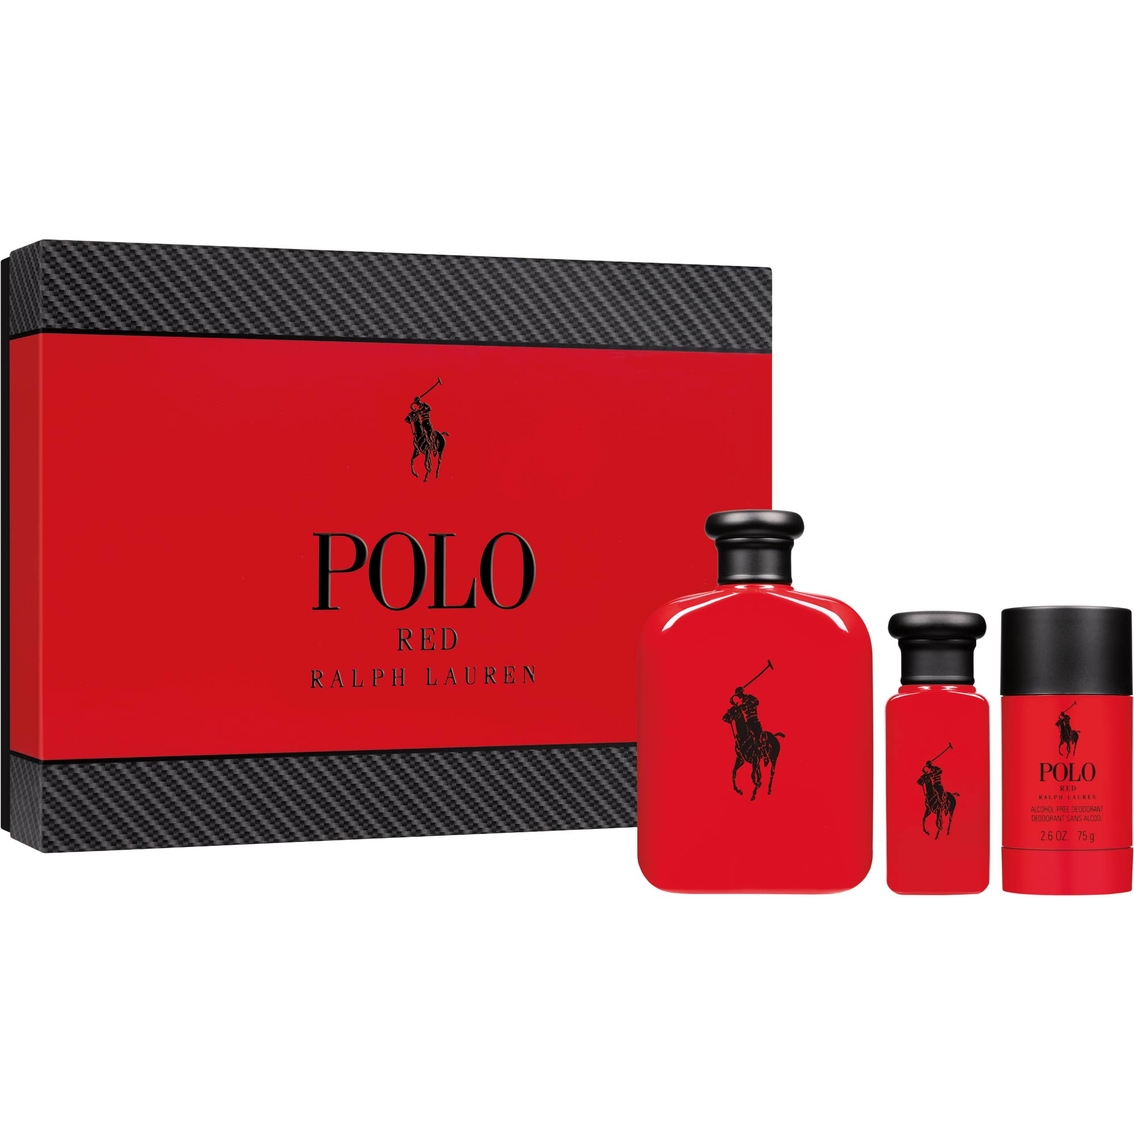 Ralph Lauren Polo Red 3 Pc. Gift Set | Gifts Sets For Him | Mother's ...